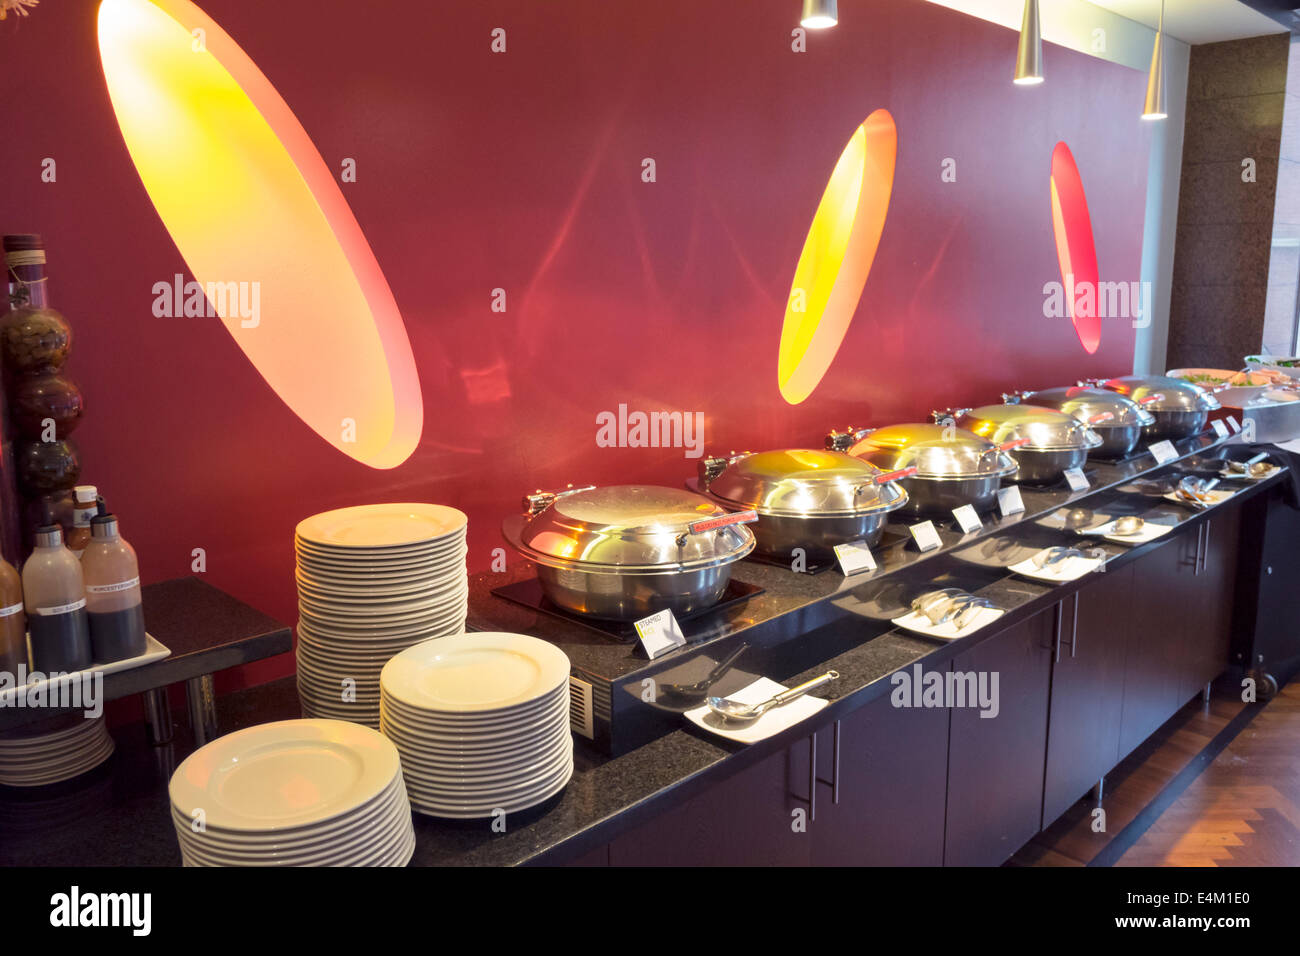 Melbourne Australia,Carlson Radisson on Flagstaff Gardens,hotel,restaurant restaurants food dining cafe cafes,chafing dish,dishes,buffet style line,pl Stock Photo